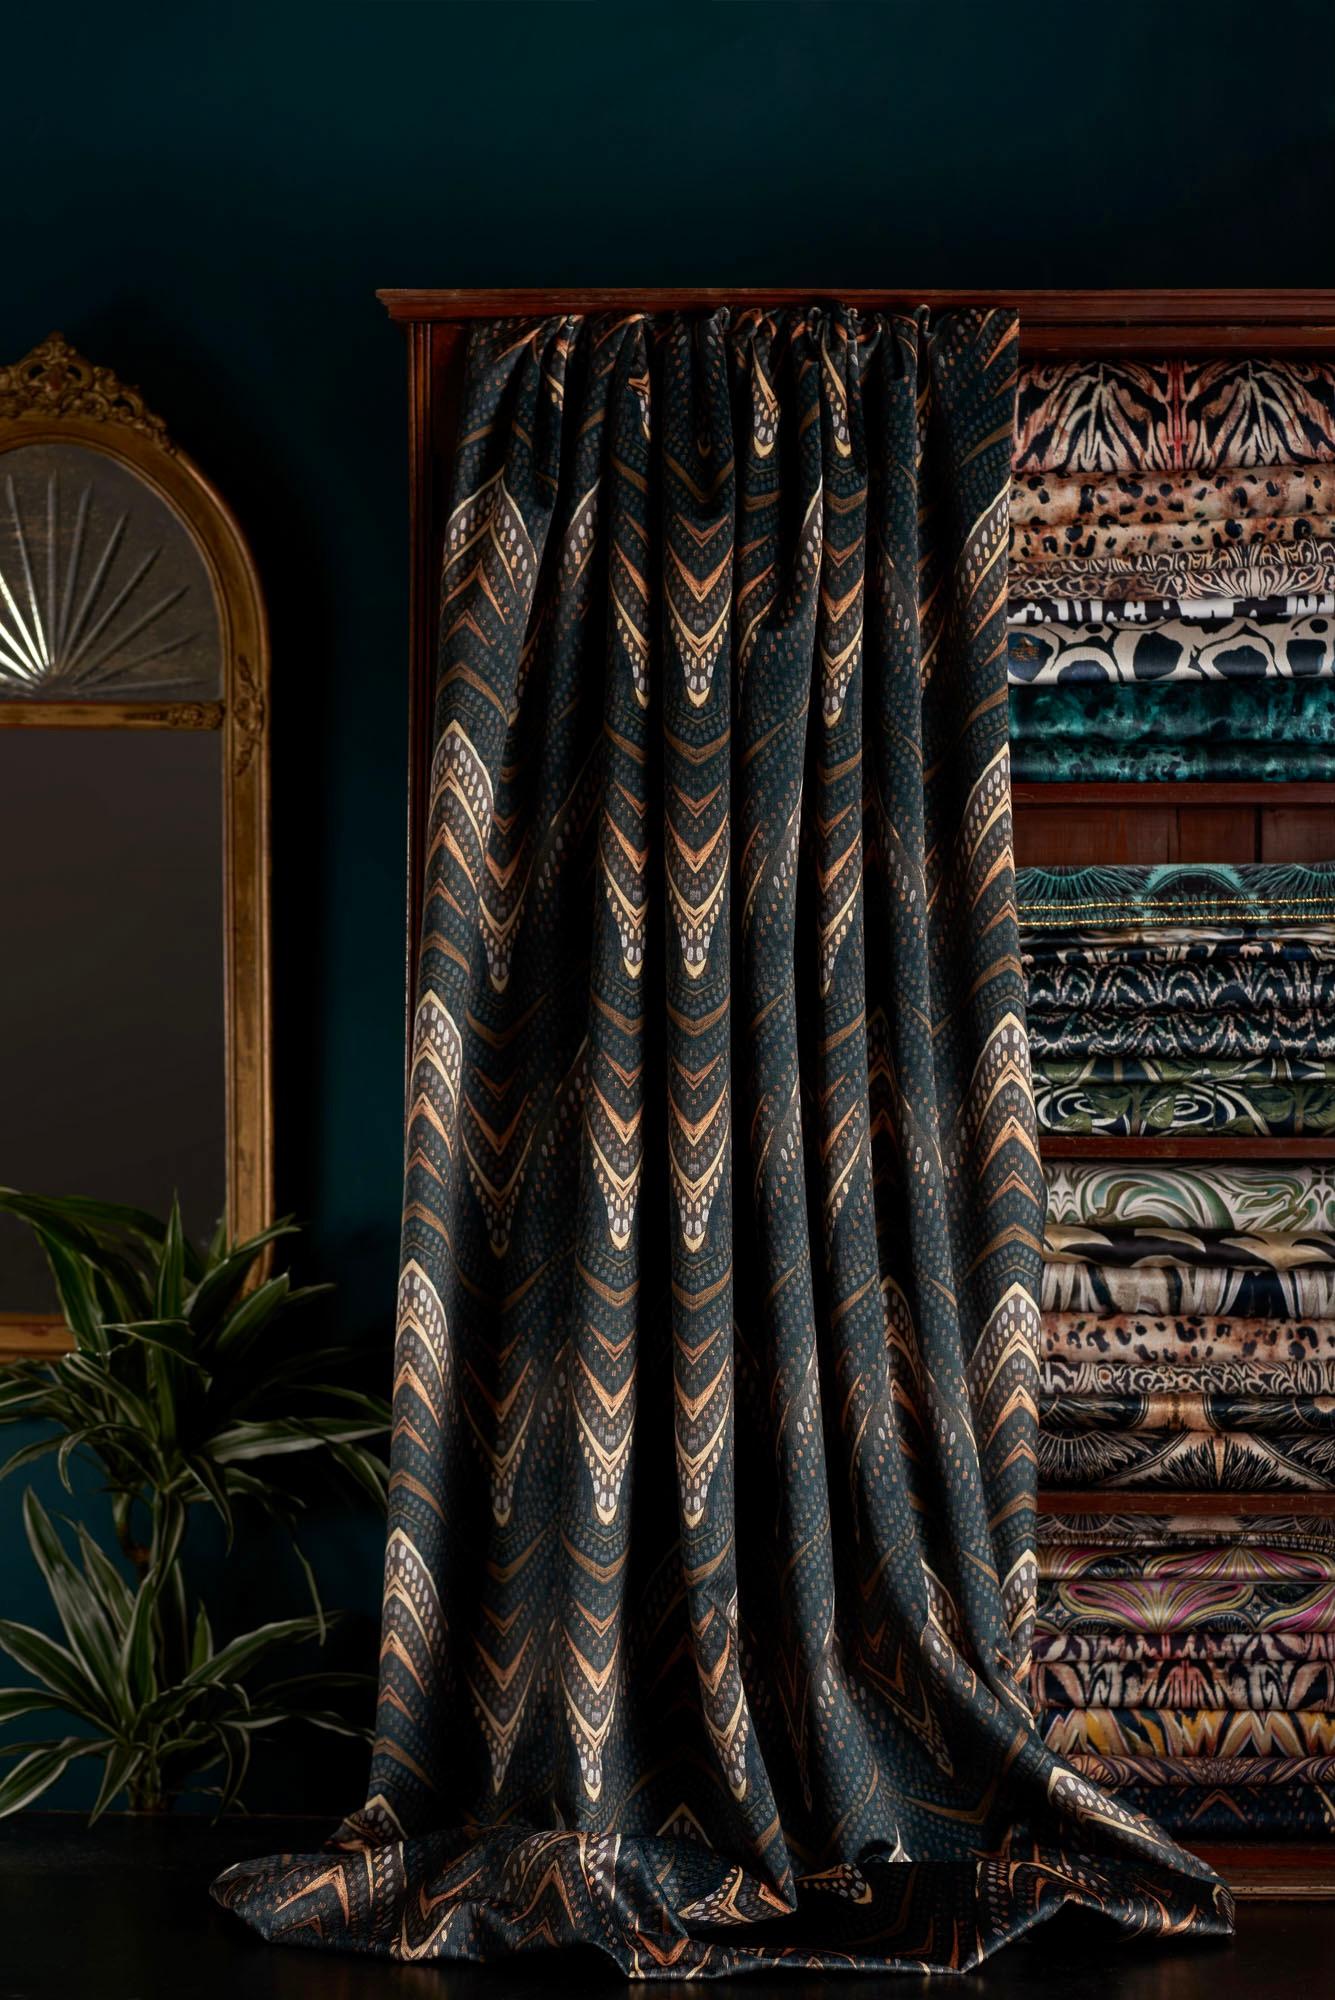 Perdita – a 1920s inspired design created from painting metallics onto black canvas. The depth has printed soft, so the background is more of a bitter chocolate/soft black colour, with grey gold and toffee accents.

This velvet is midweight, with a